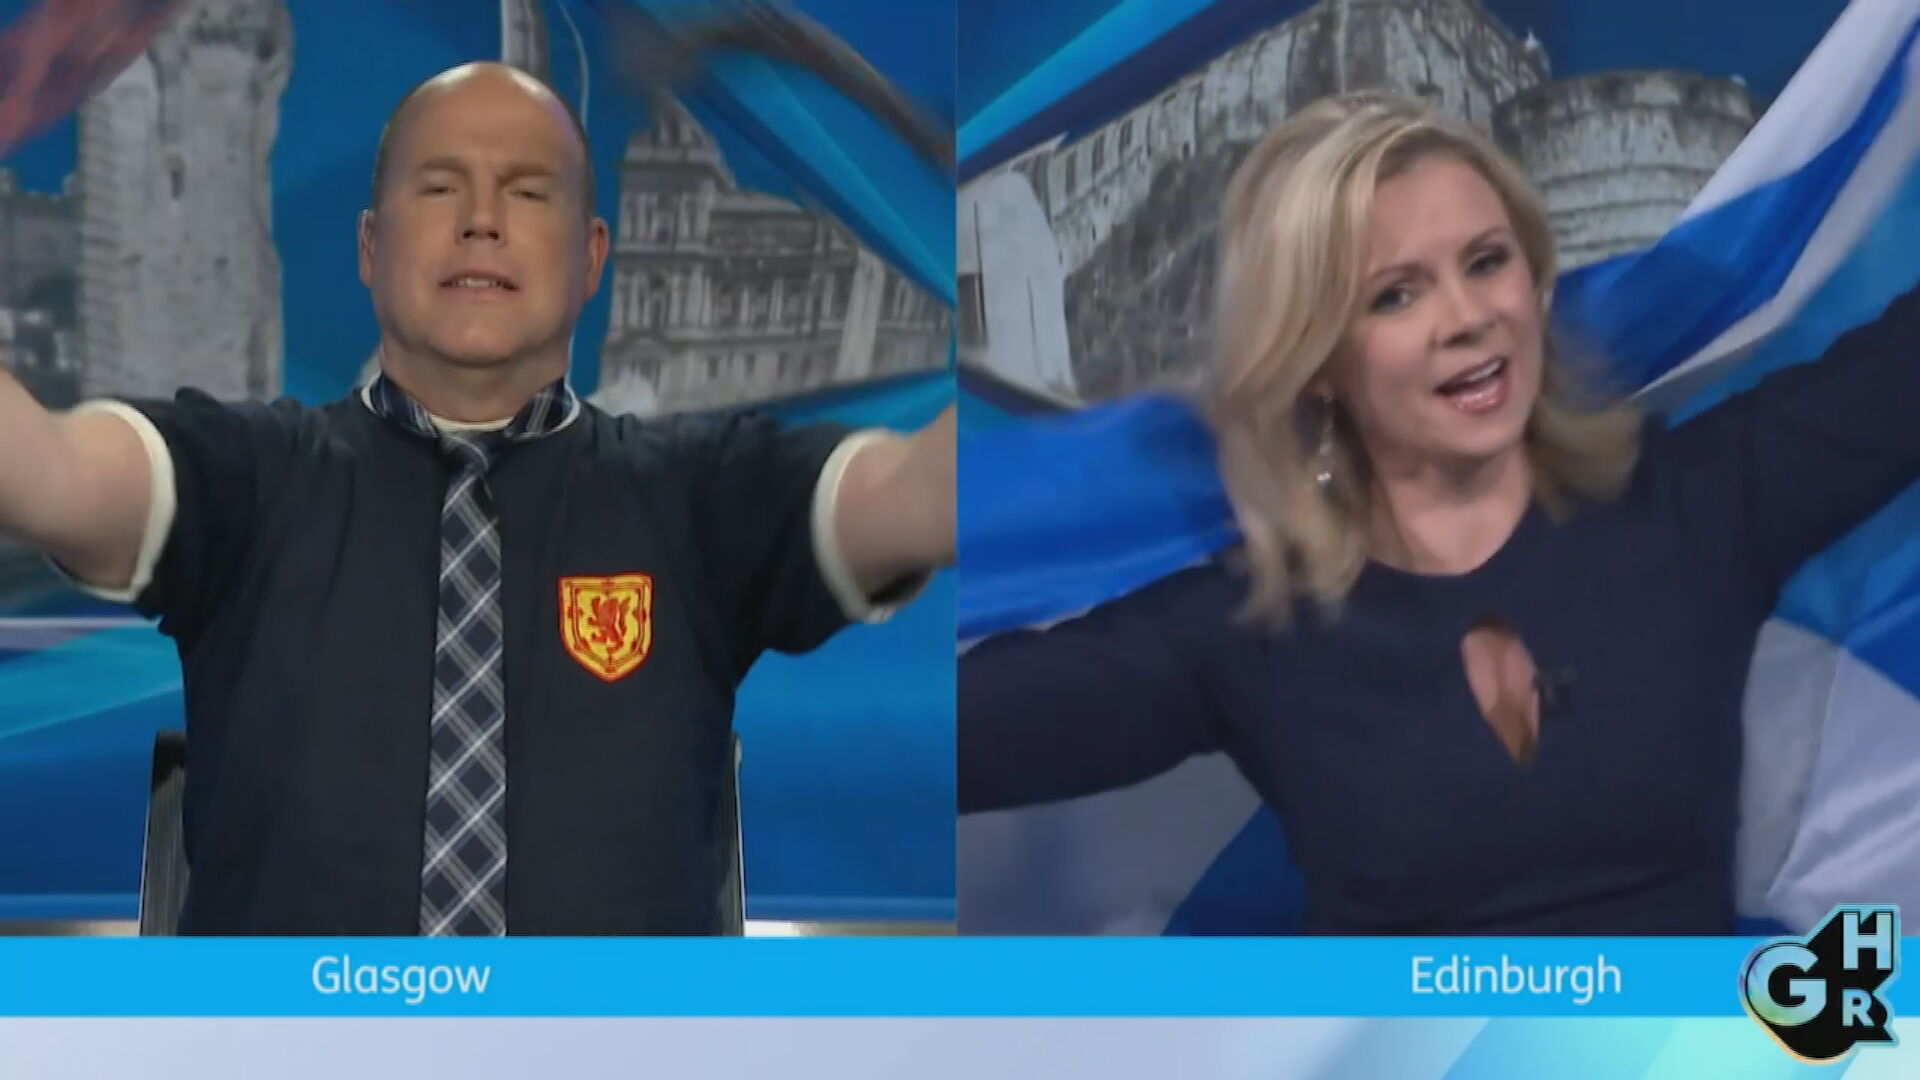 STV's John Mackay and Kelly-Anne Woodland featured in music video